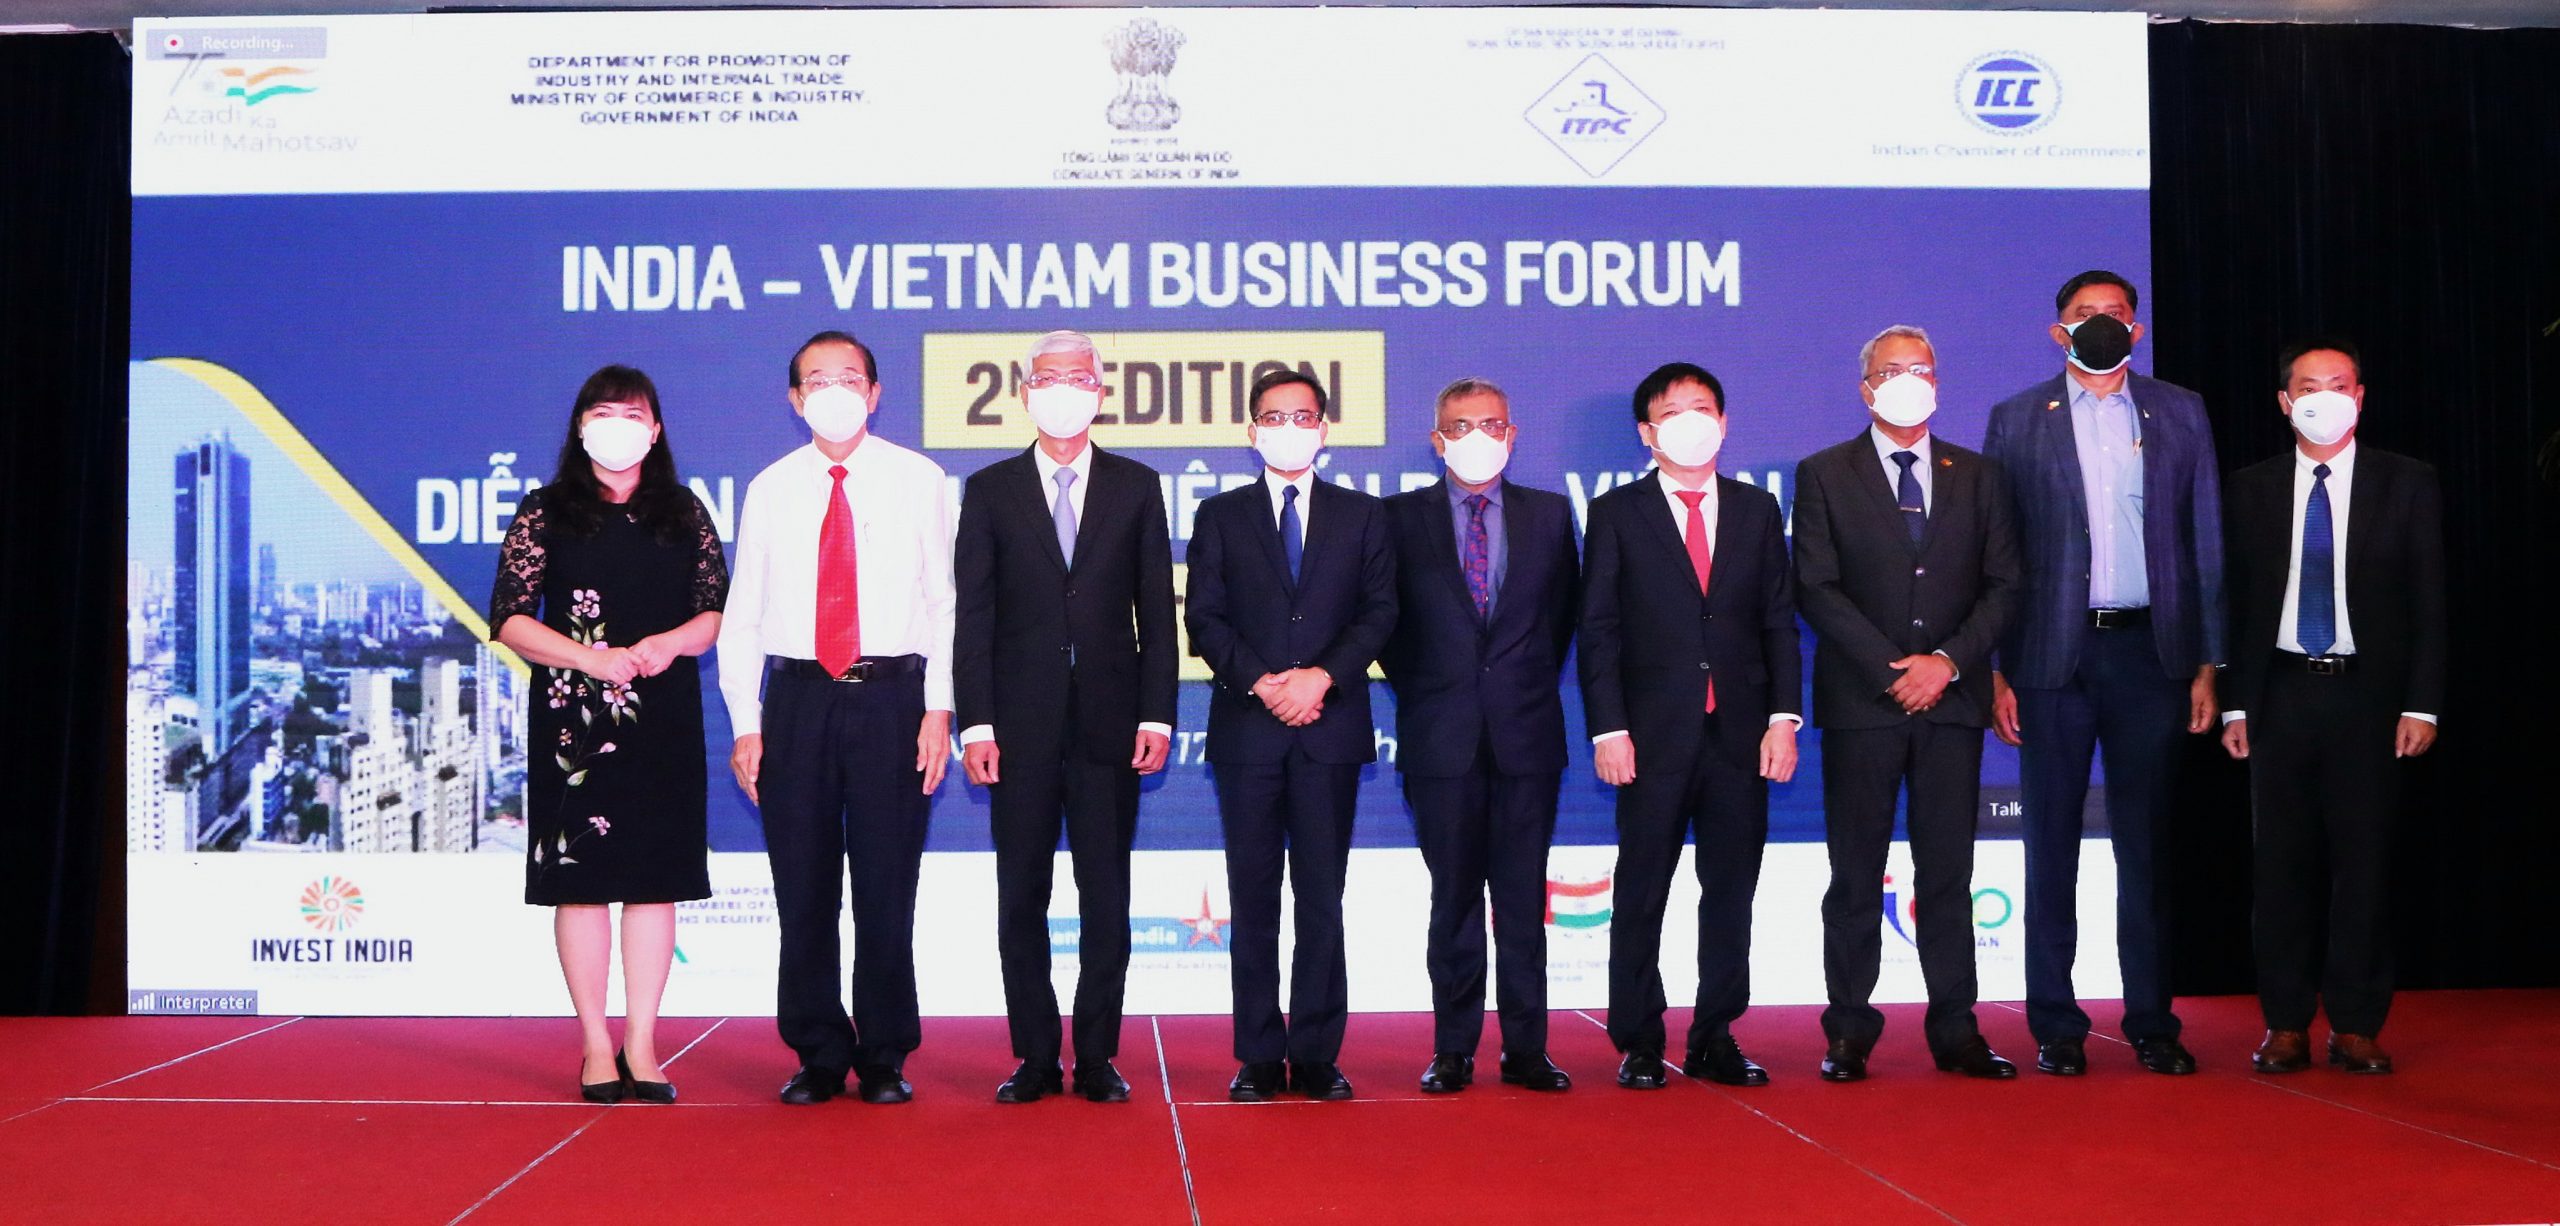 2nd Edition of India – Vietnam Business Forum